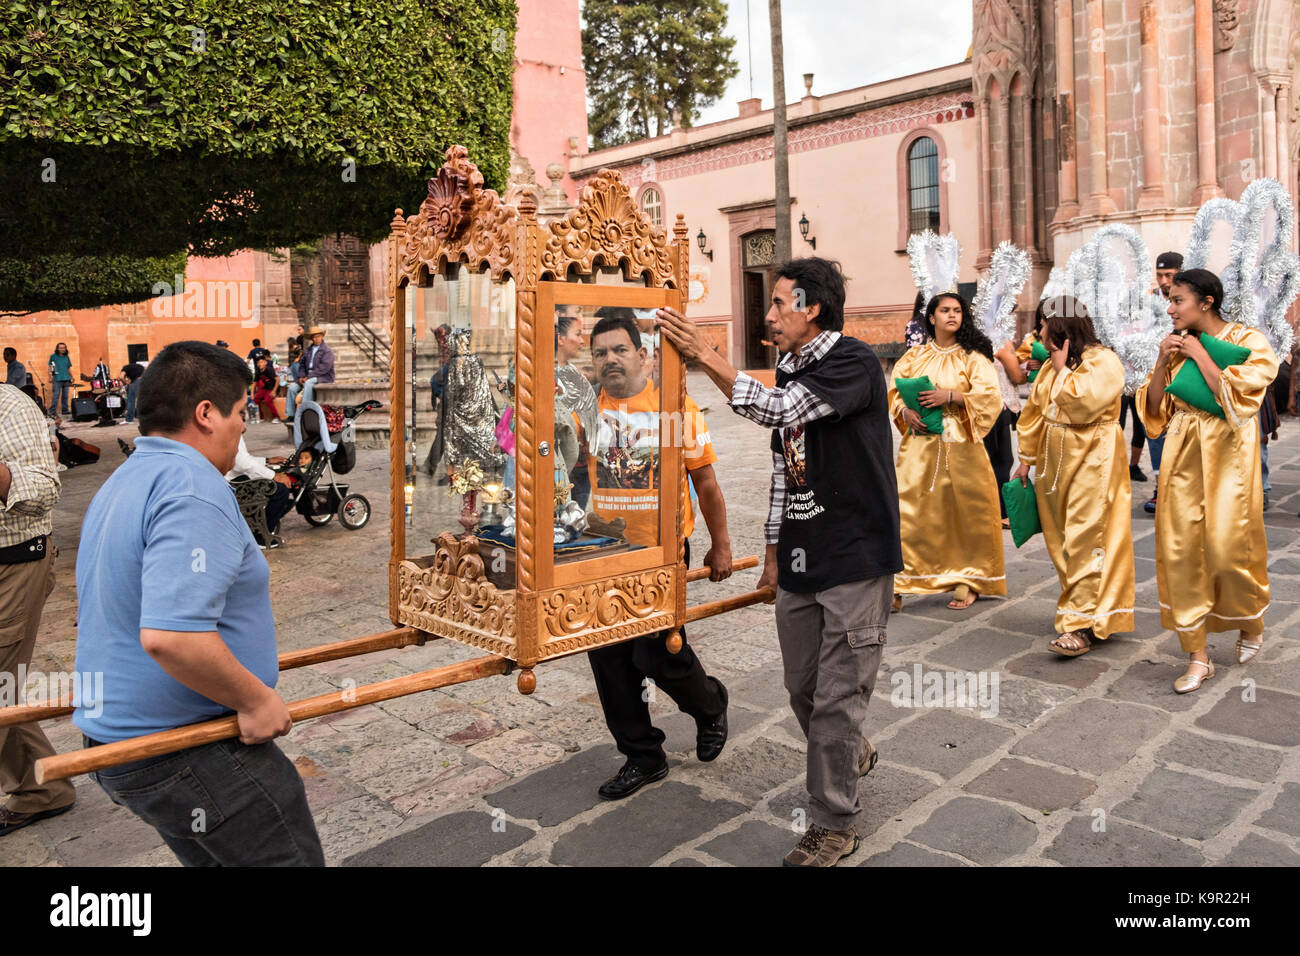 Local residents carry the statue of Saint Michael from the Parroquia de San Miguel Arcangel church at the start of the week long fiesta of the patron saint September 21, 2017 in San Miguel de Allende, Mexico. Stock Photo